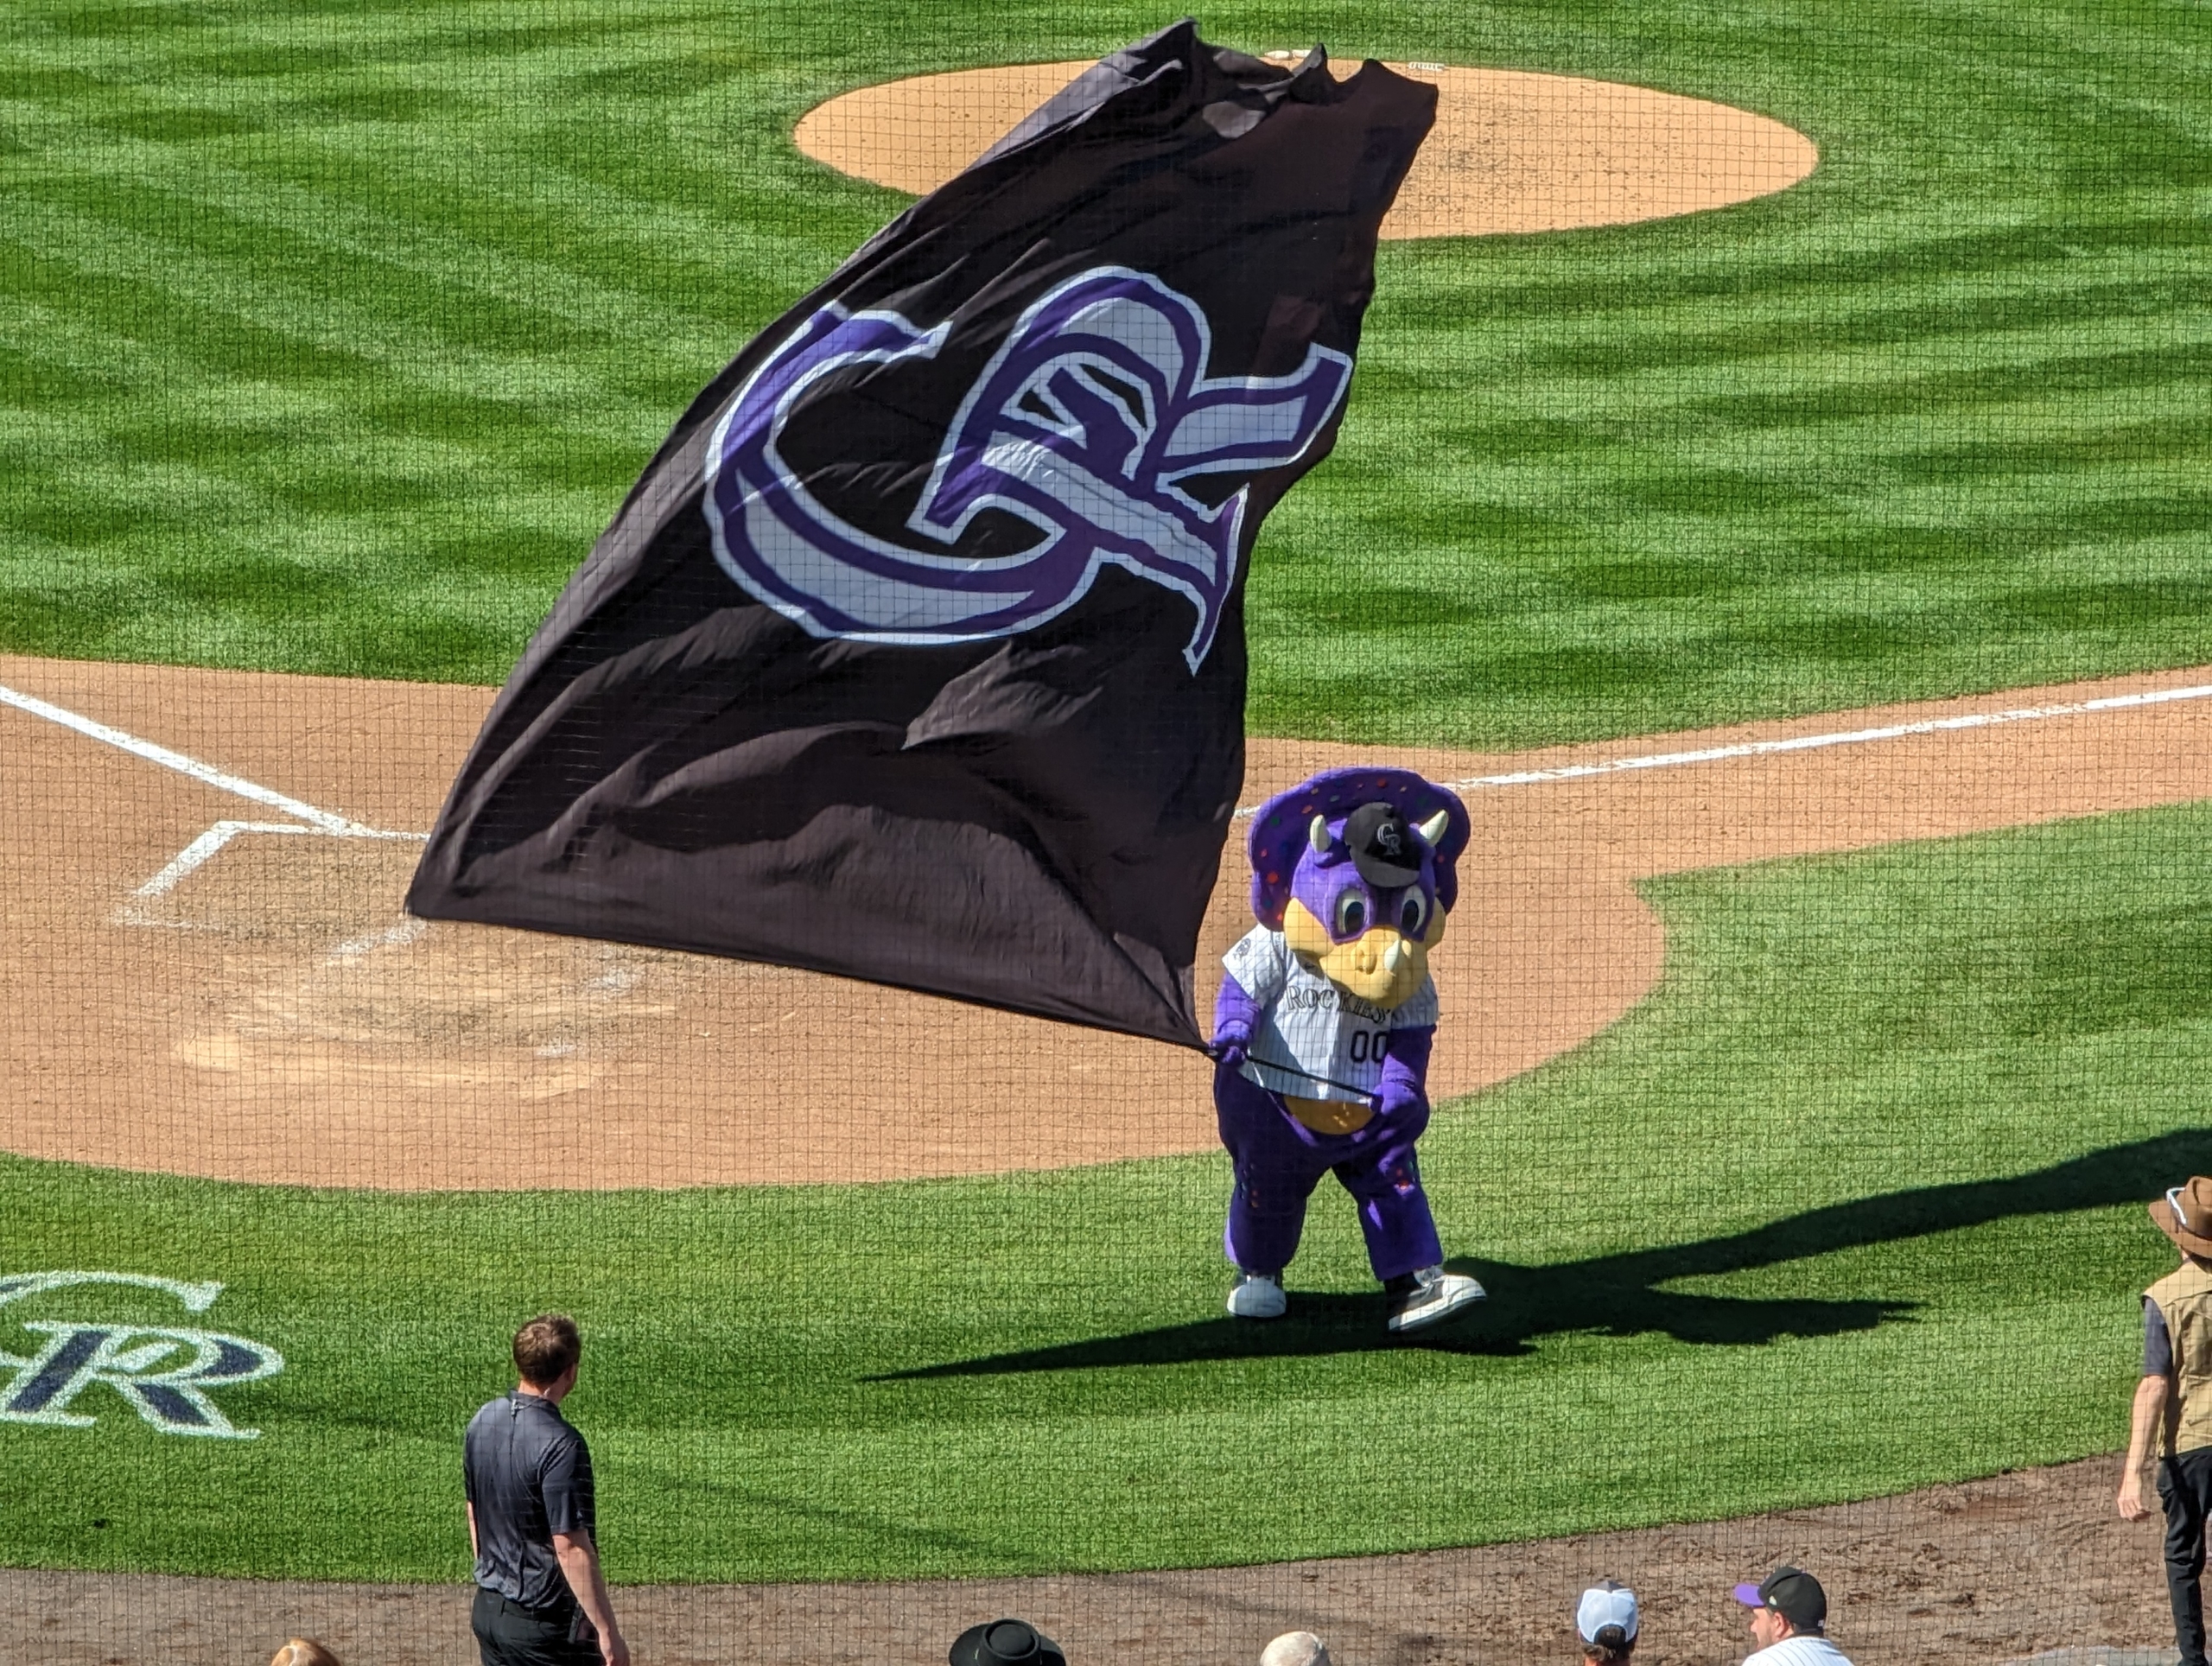 Dinger waves a victory flag after the Rockies defeated the Diamondbacks, 12–4.